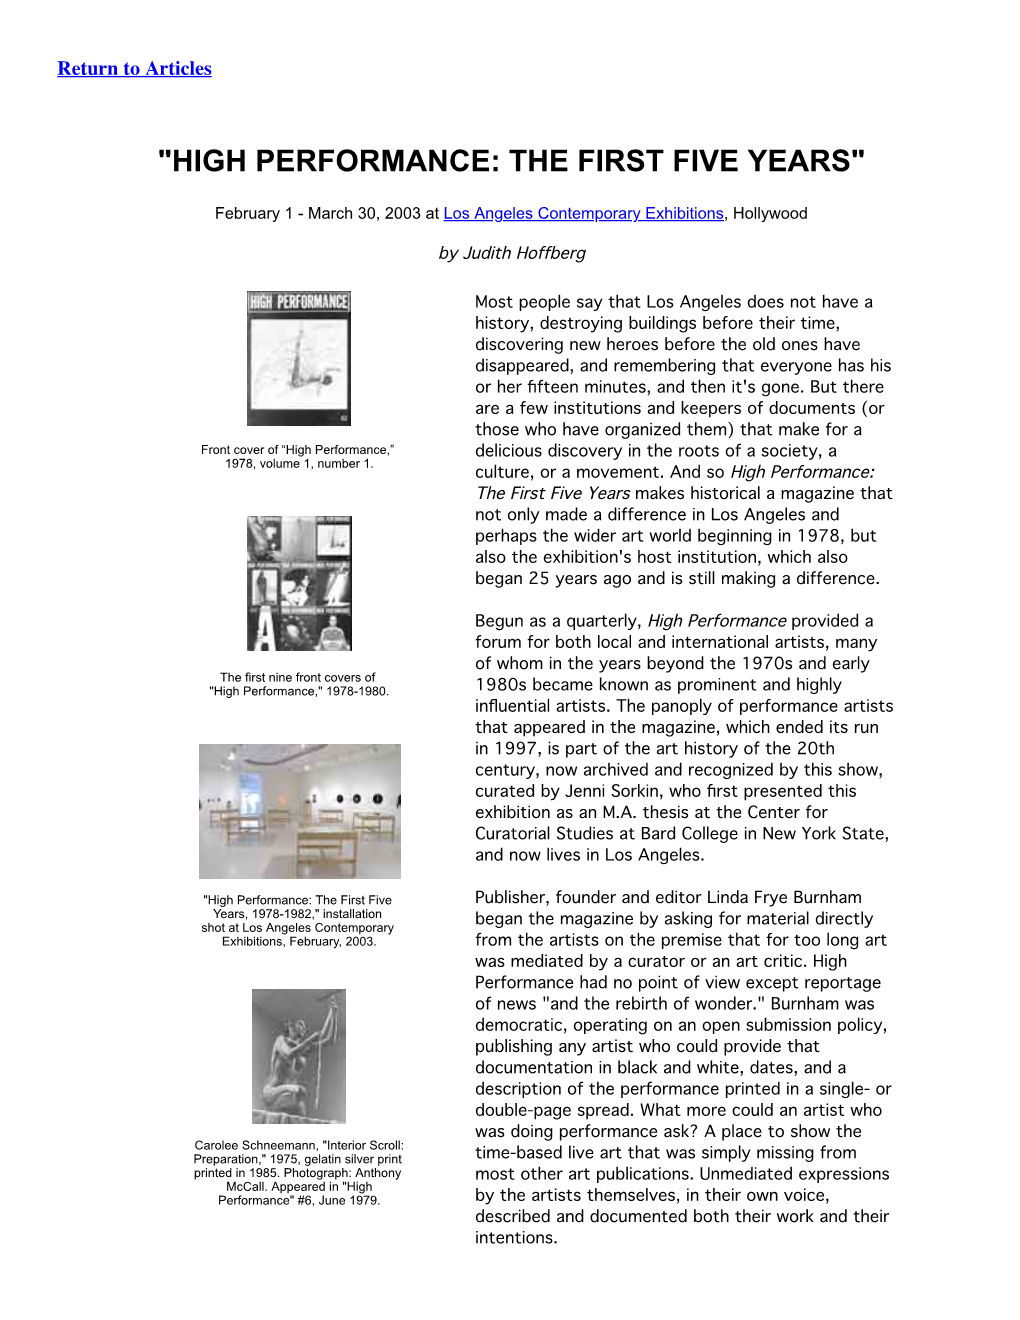 Judith Hoffberg Review of High Performance from 2003